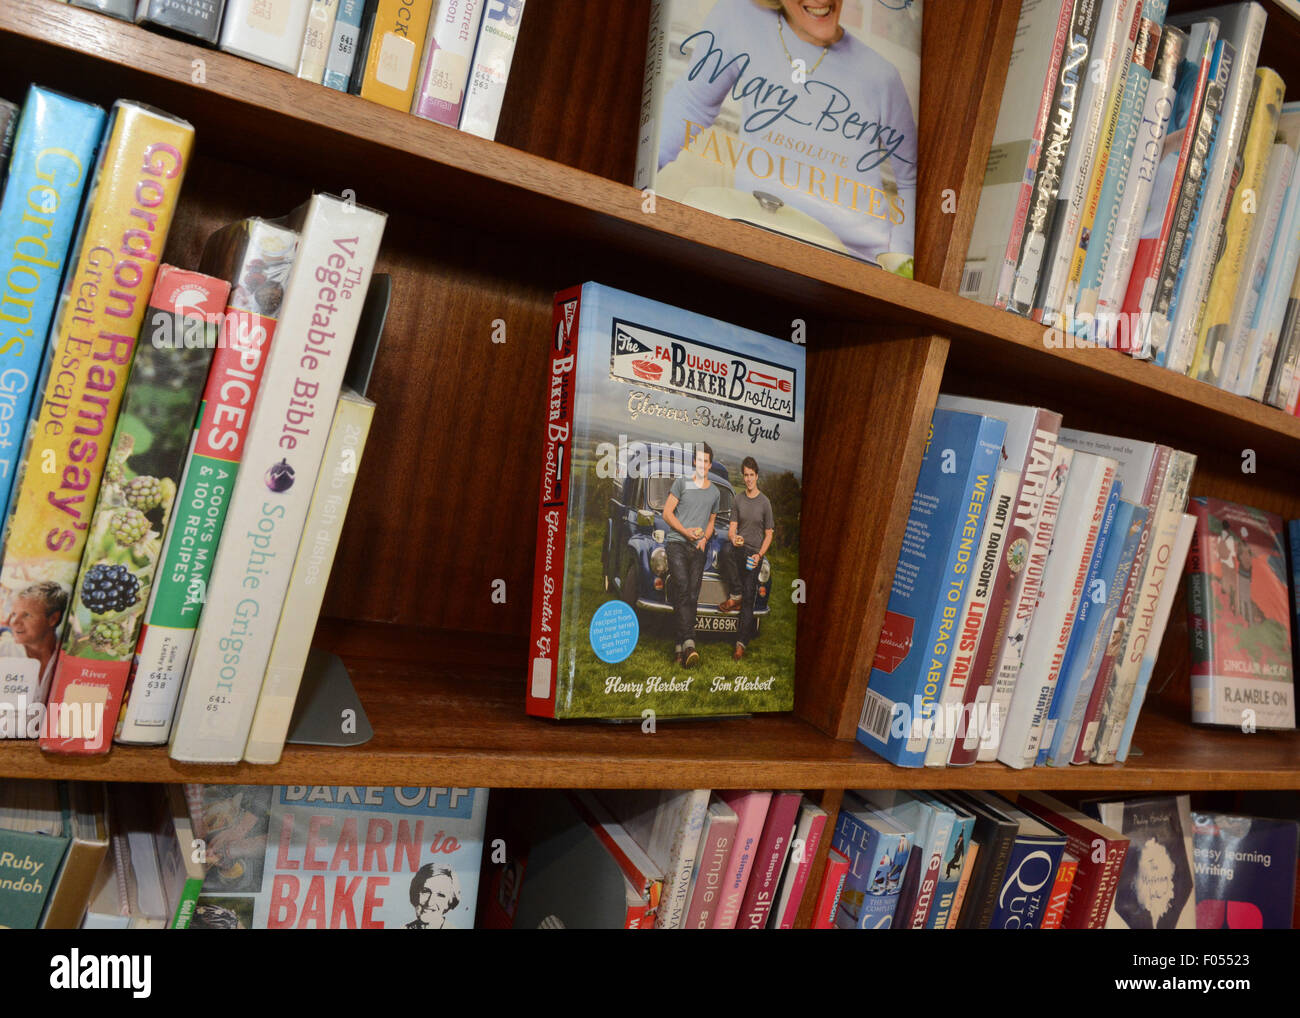 Braunton Library Preview Library reopening after refurbishment Devon Library     Picture: Mike Southon Ref: BNMS20150723E-008 C Stock Photo